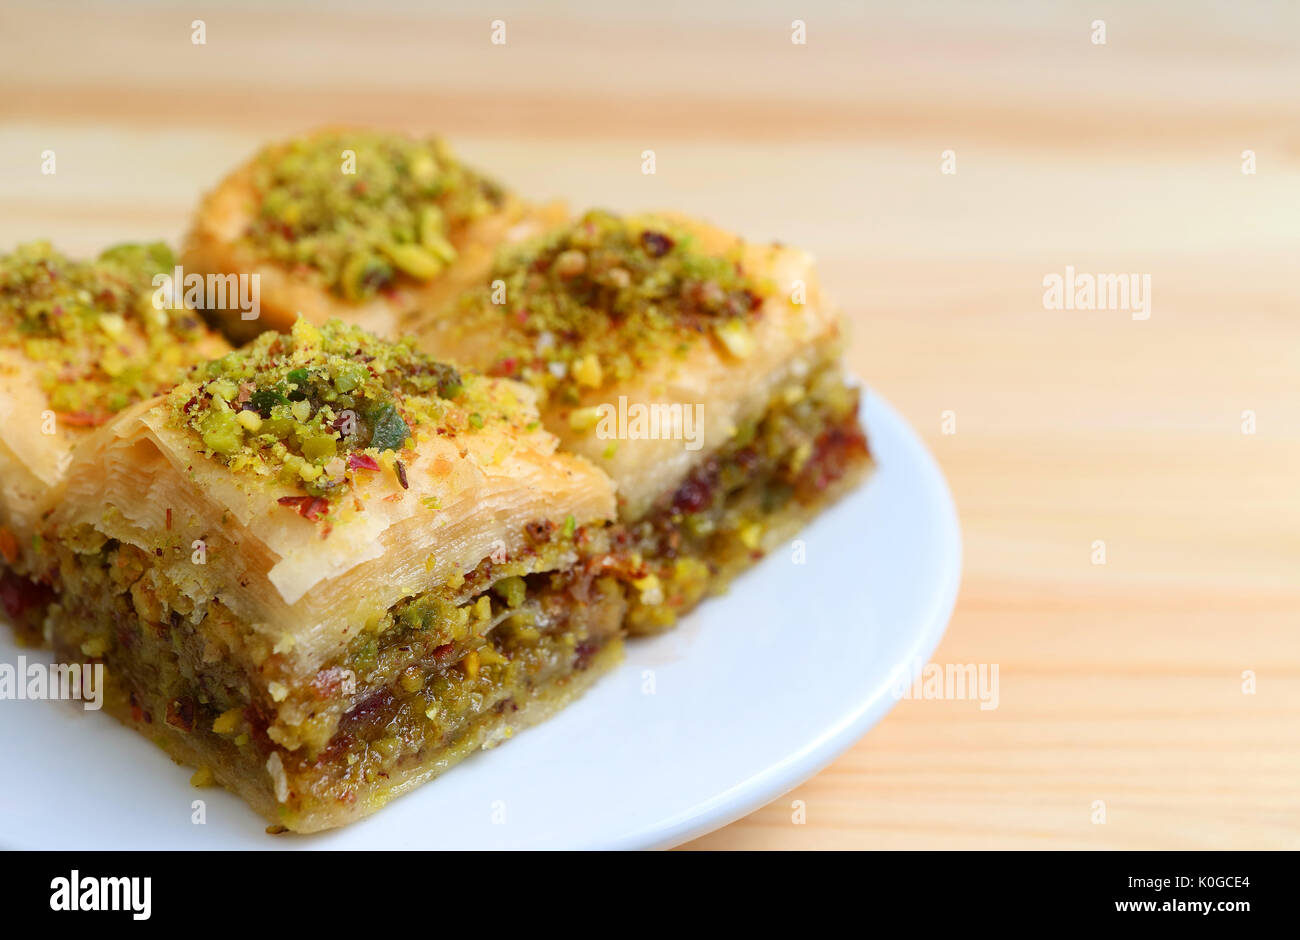 Close-up of Baklava Sweets with Pistachio Nuts Served Wooden Table, Blurred Background Stock Photo